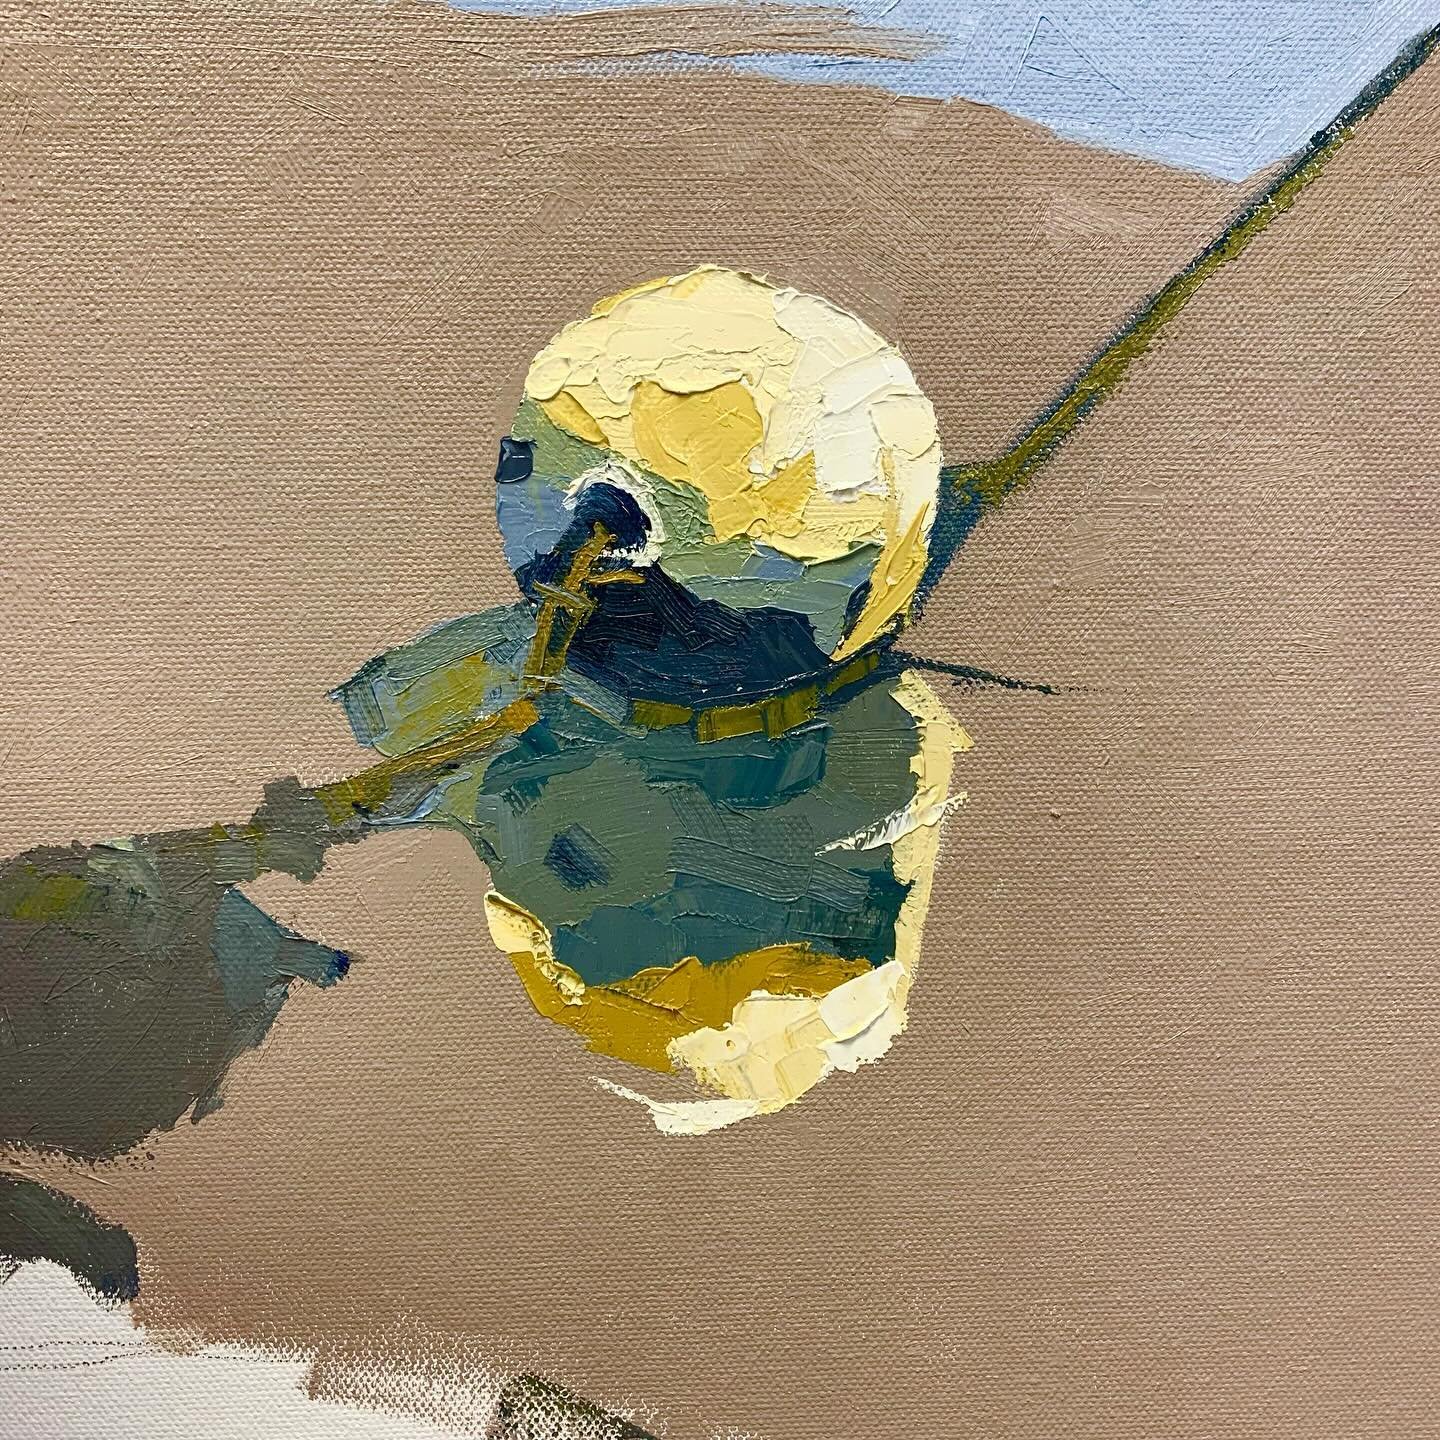 Detail from a new work in progress on the easel. #wipart #oiloncanvaspainting #dory #oilpainting #boatlifestyle #capecodviews #capecodlife #brewsterma #lowtide #studioprocess #artstudio